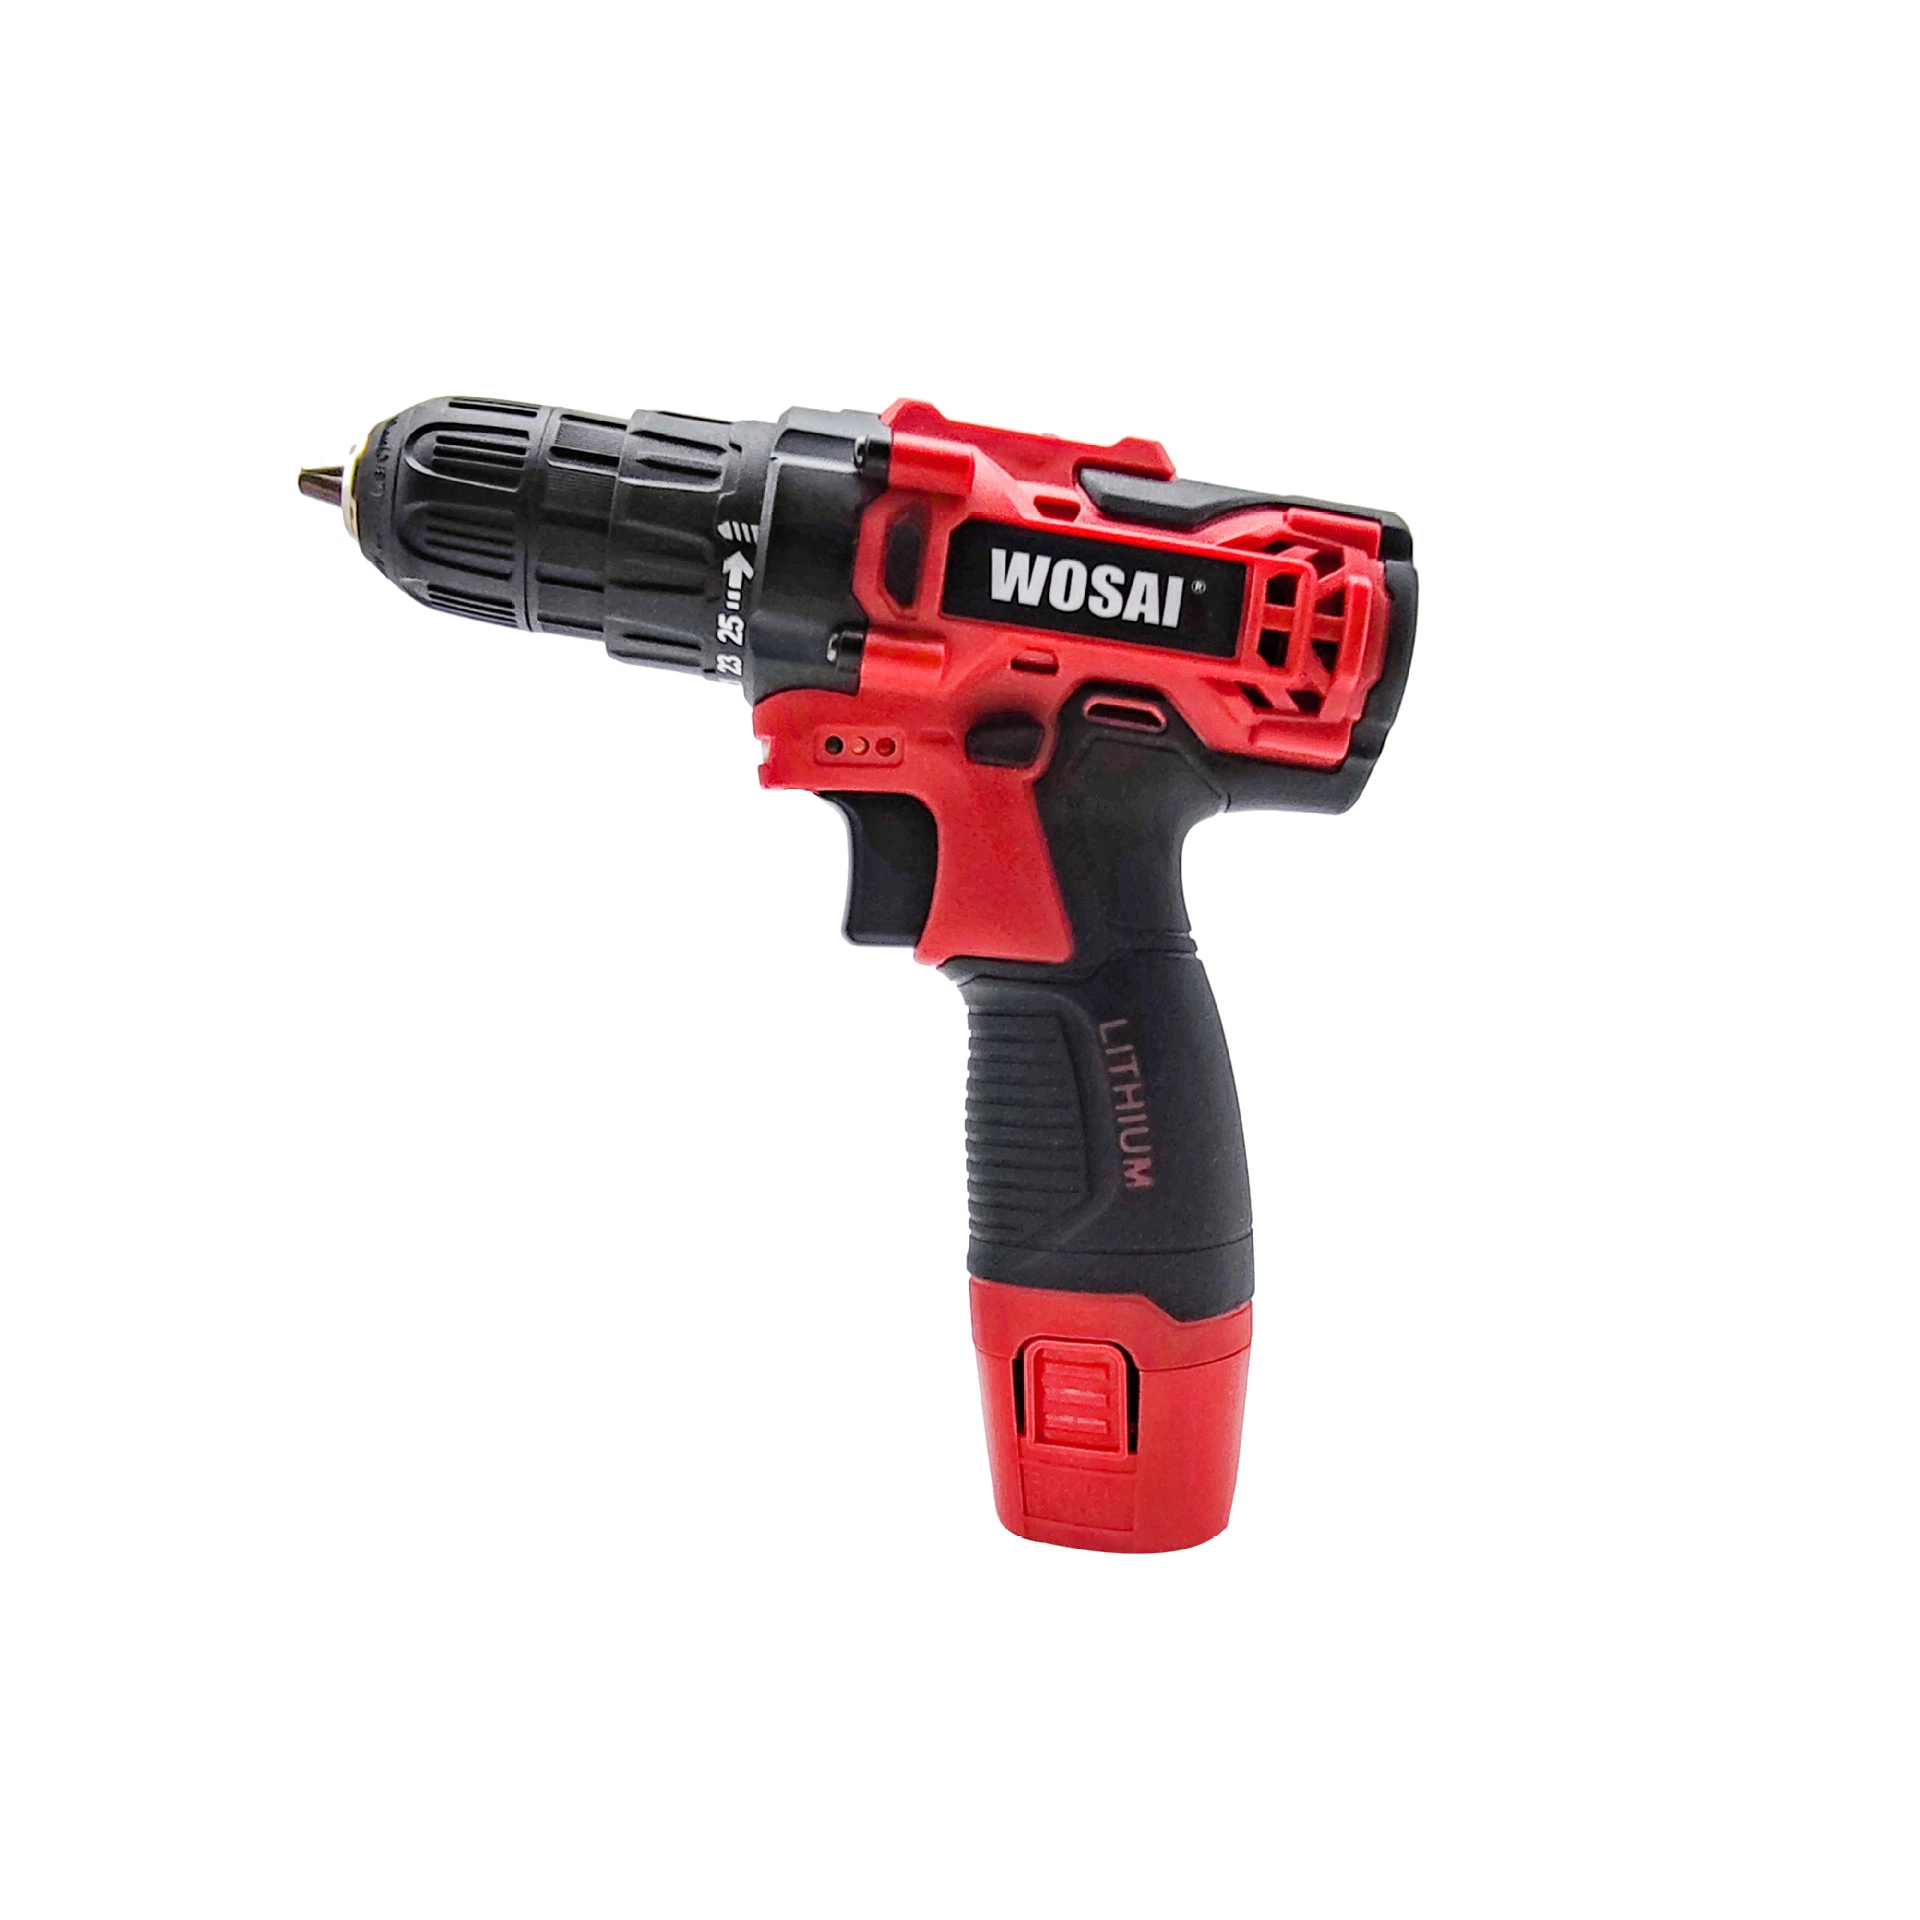 12V Teh-Electrics Drill Combined Wireless Electric Screw Electric Cordless Drill